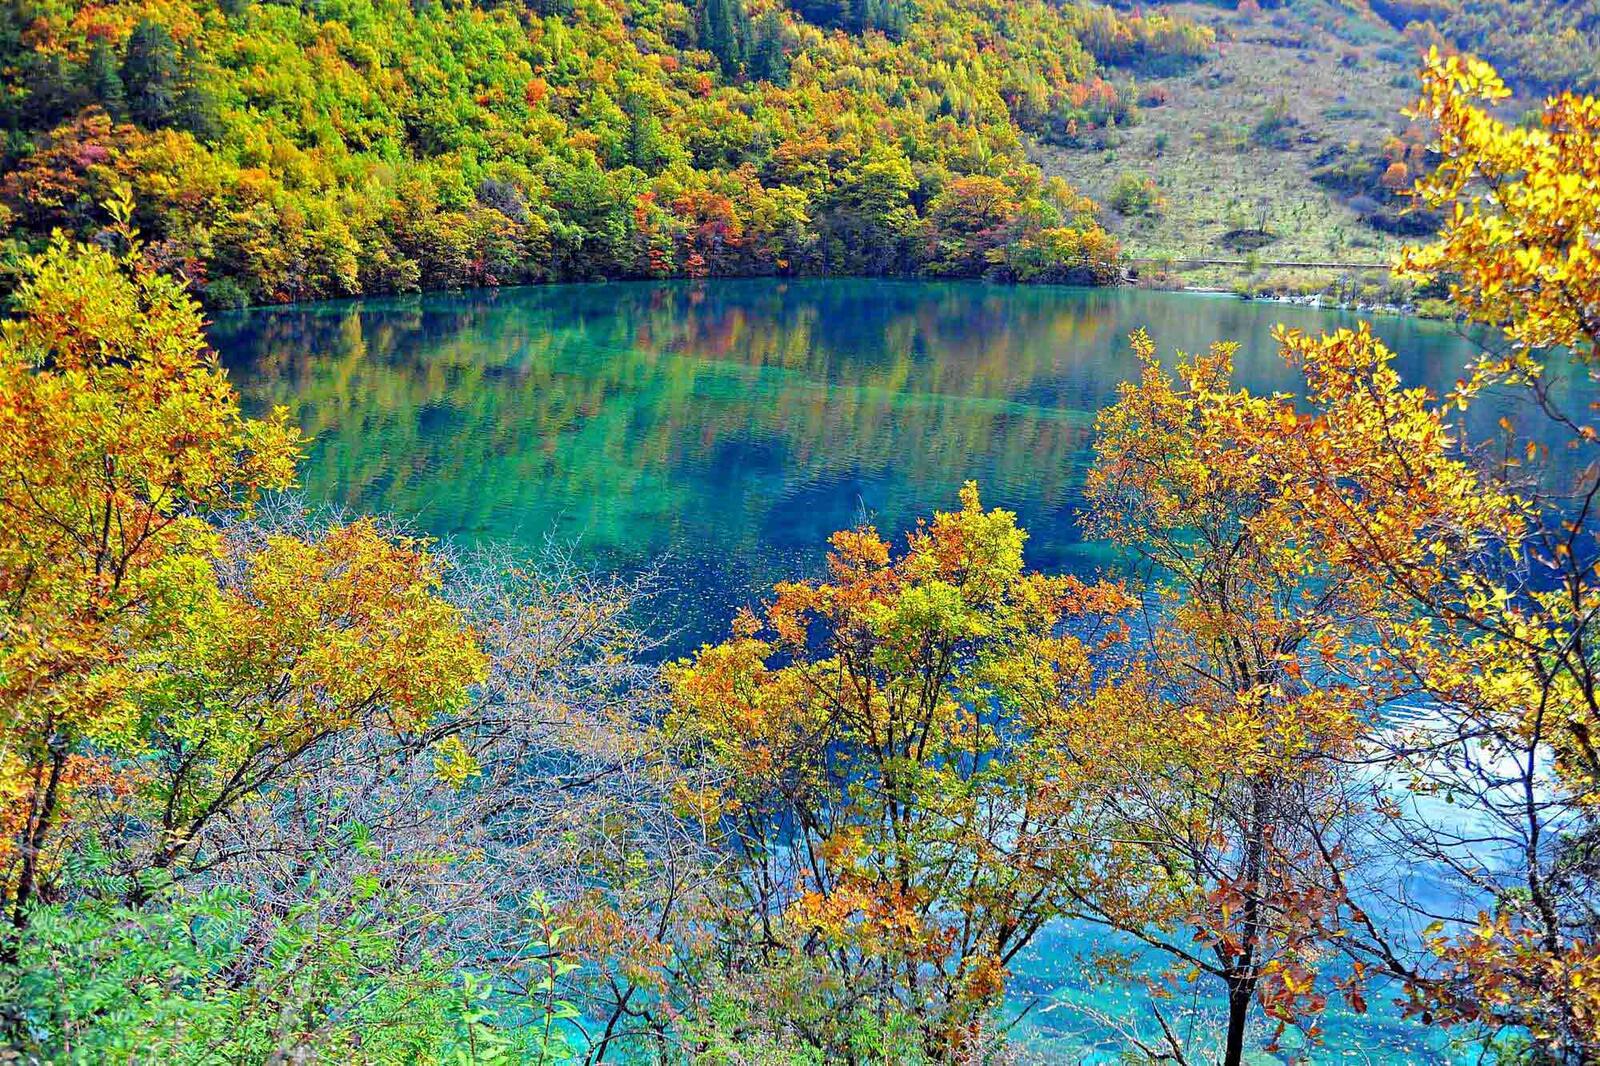 Free photo A lake in a nature reserve in Sichuan province in central China